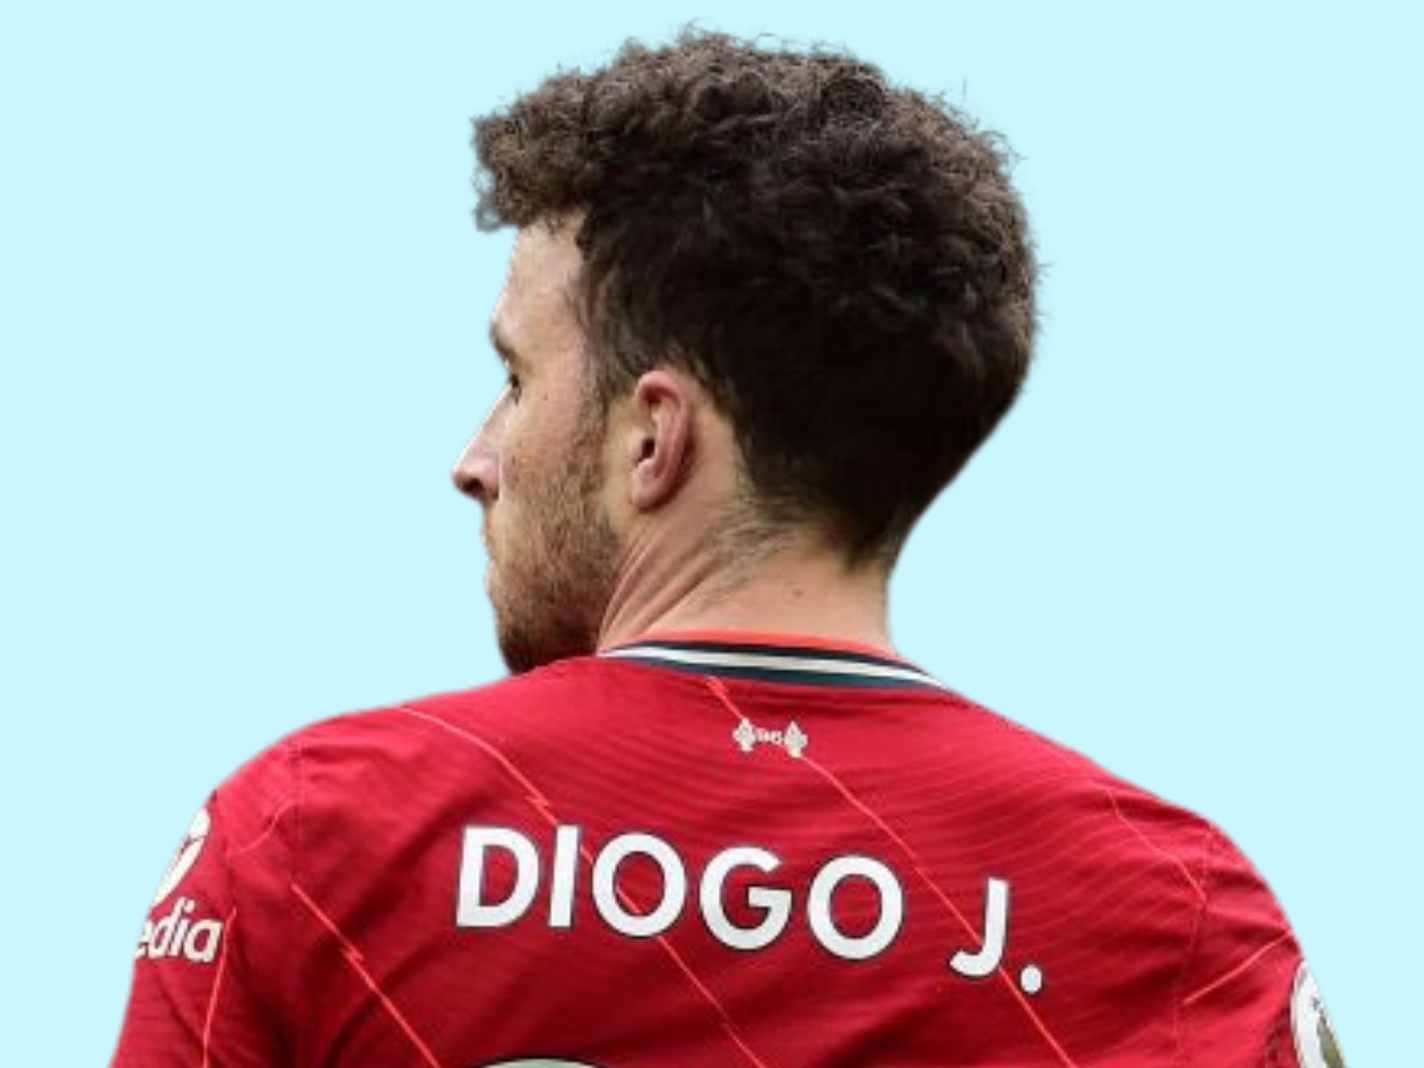 Diogo Jota Doesn’t Keep His Real Name On Shirt Because It’s Too Common